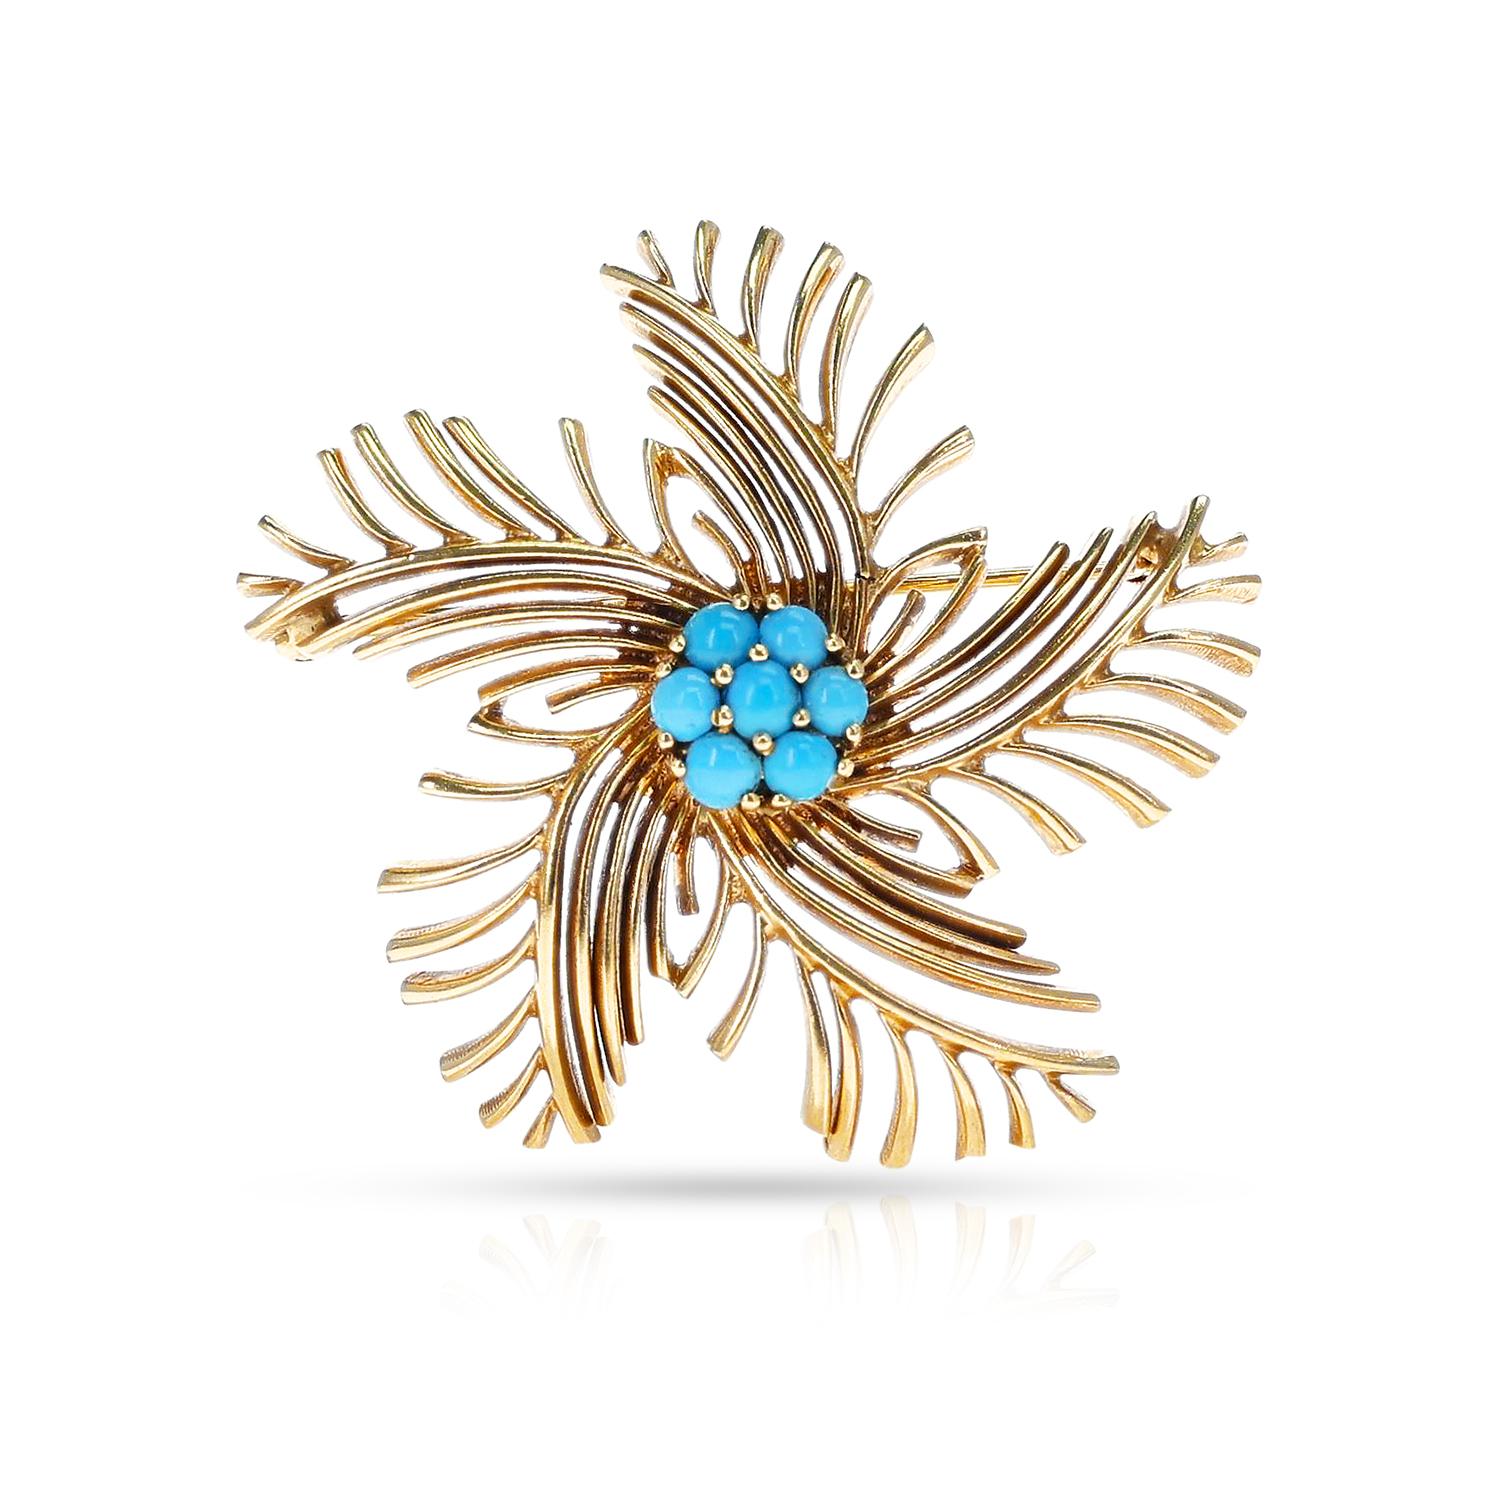 A Turquoise Cabochon Star/Floral Brooch made in 14k yellow gold. The brooch is 1.75 inches and weighs a total of 14.68 grams.

Matching earrings available. 


SKU 1144-REJA/MADJAL